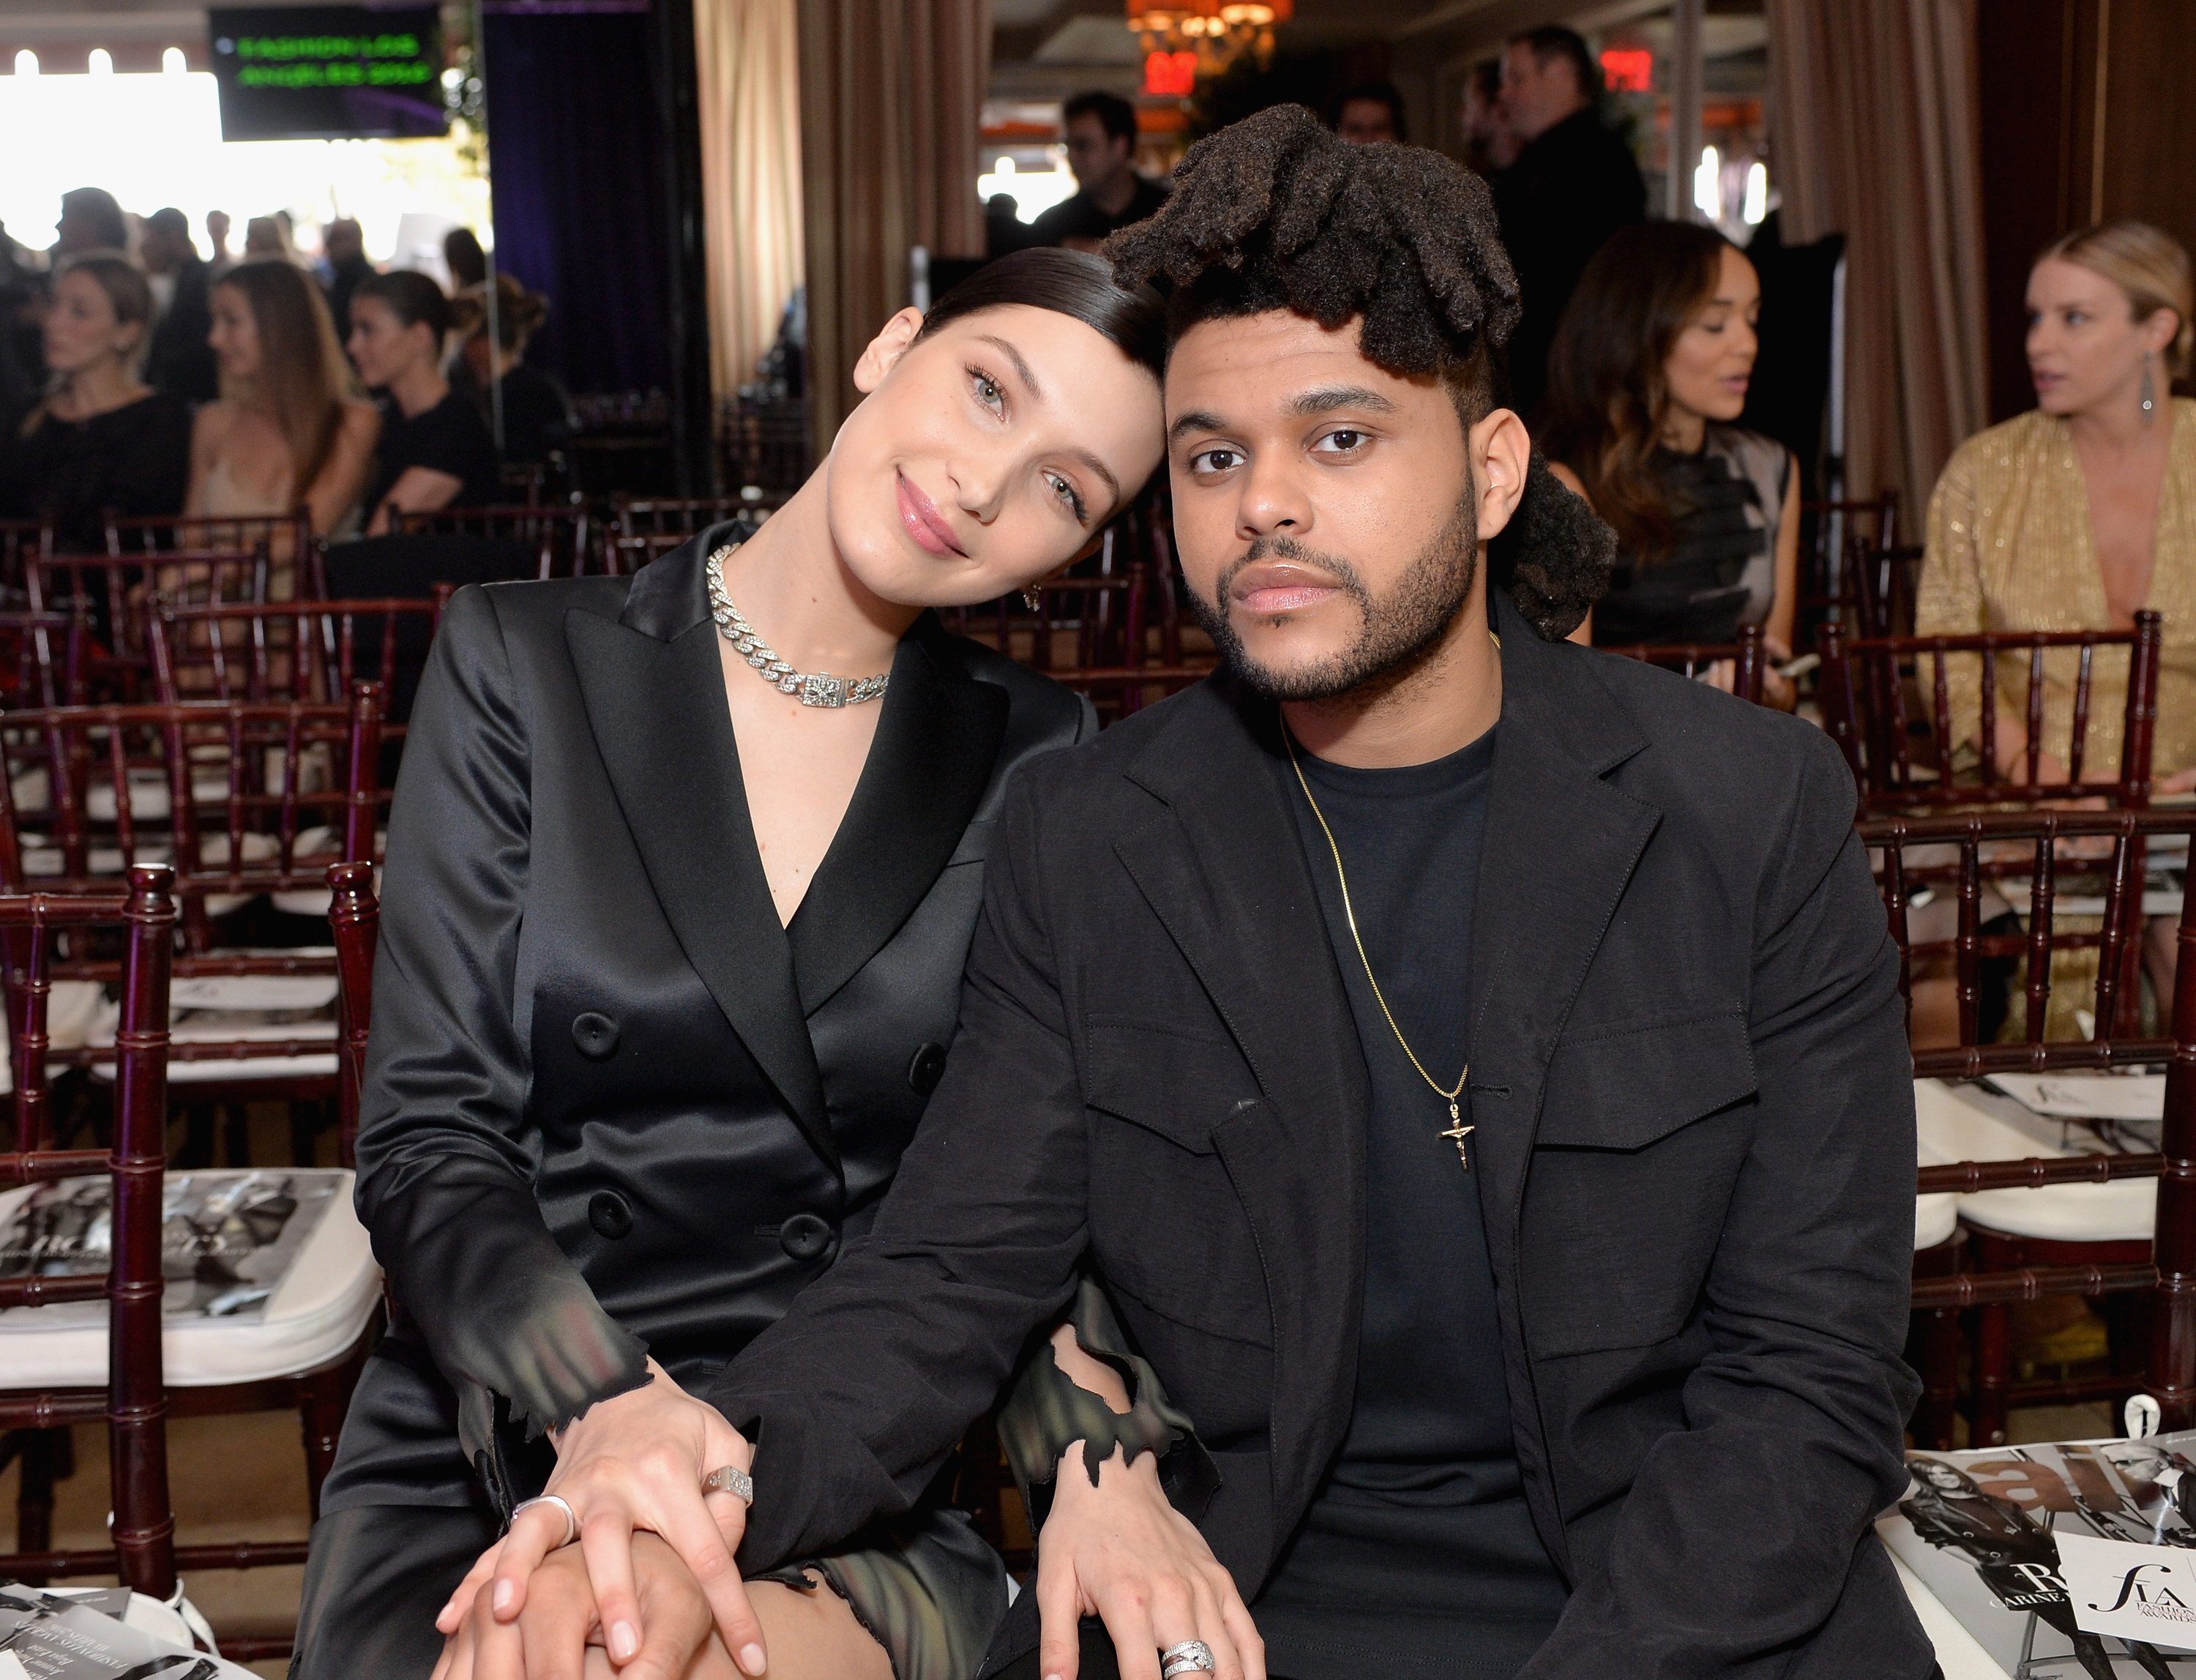 Bella and the Weeknd sitting together and touching each other&#x27;s legs at a fashion show